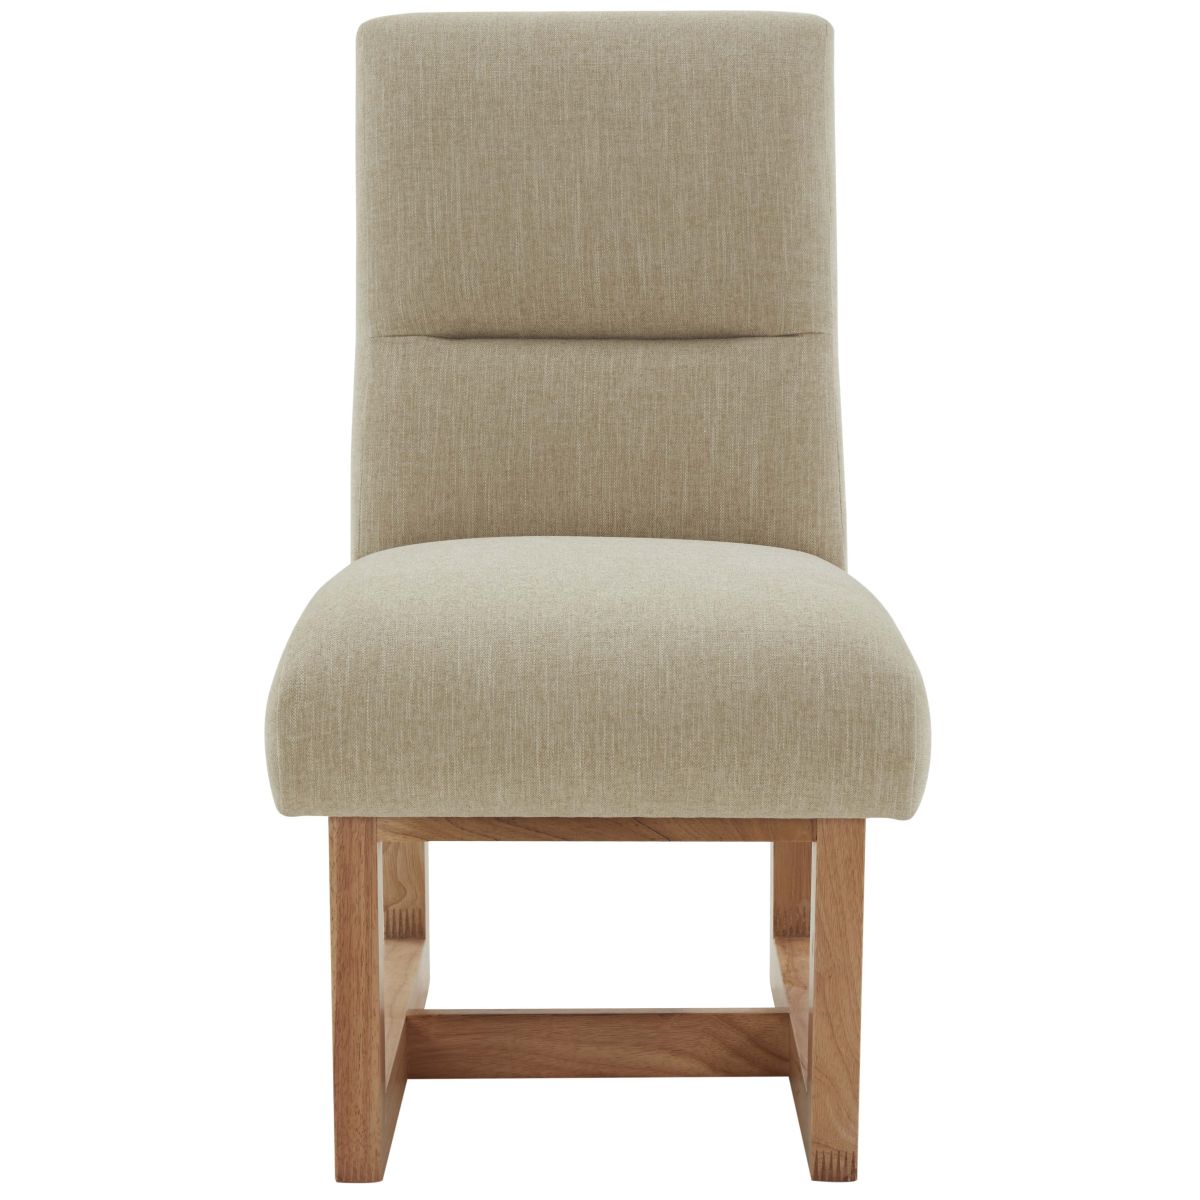 Safavieh Couture Fayette Wood Frame Dining Chair